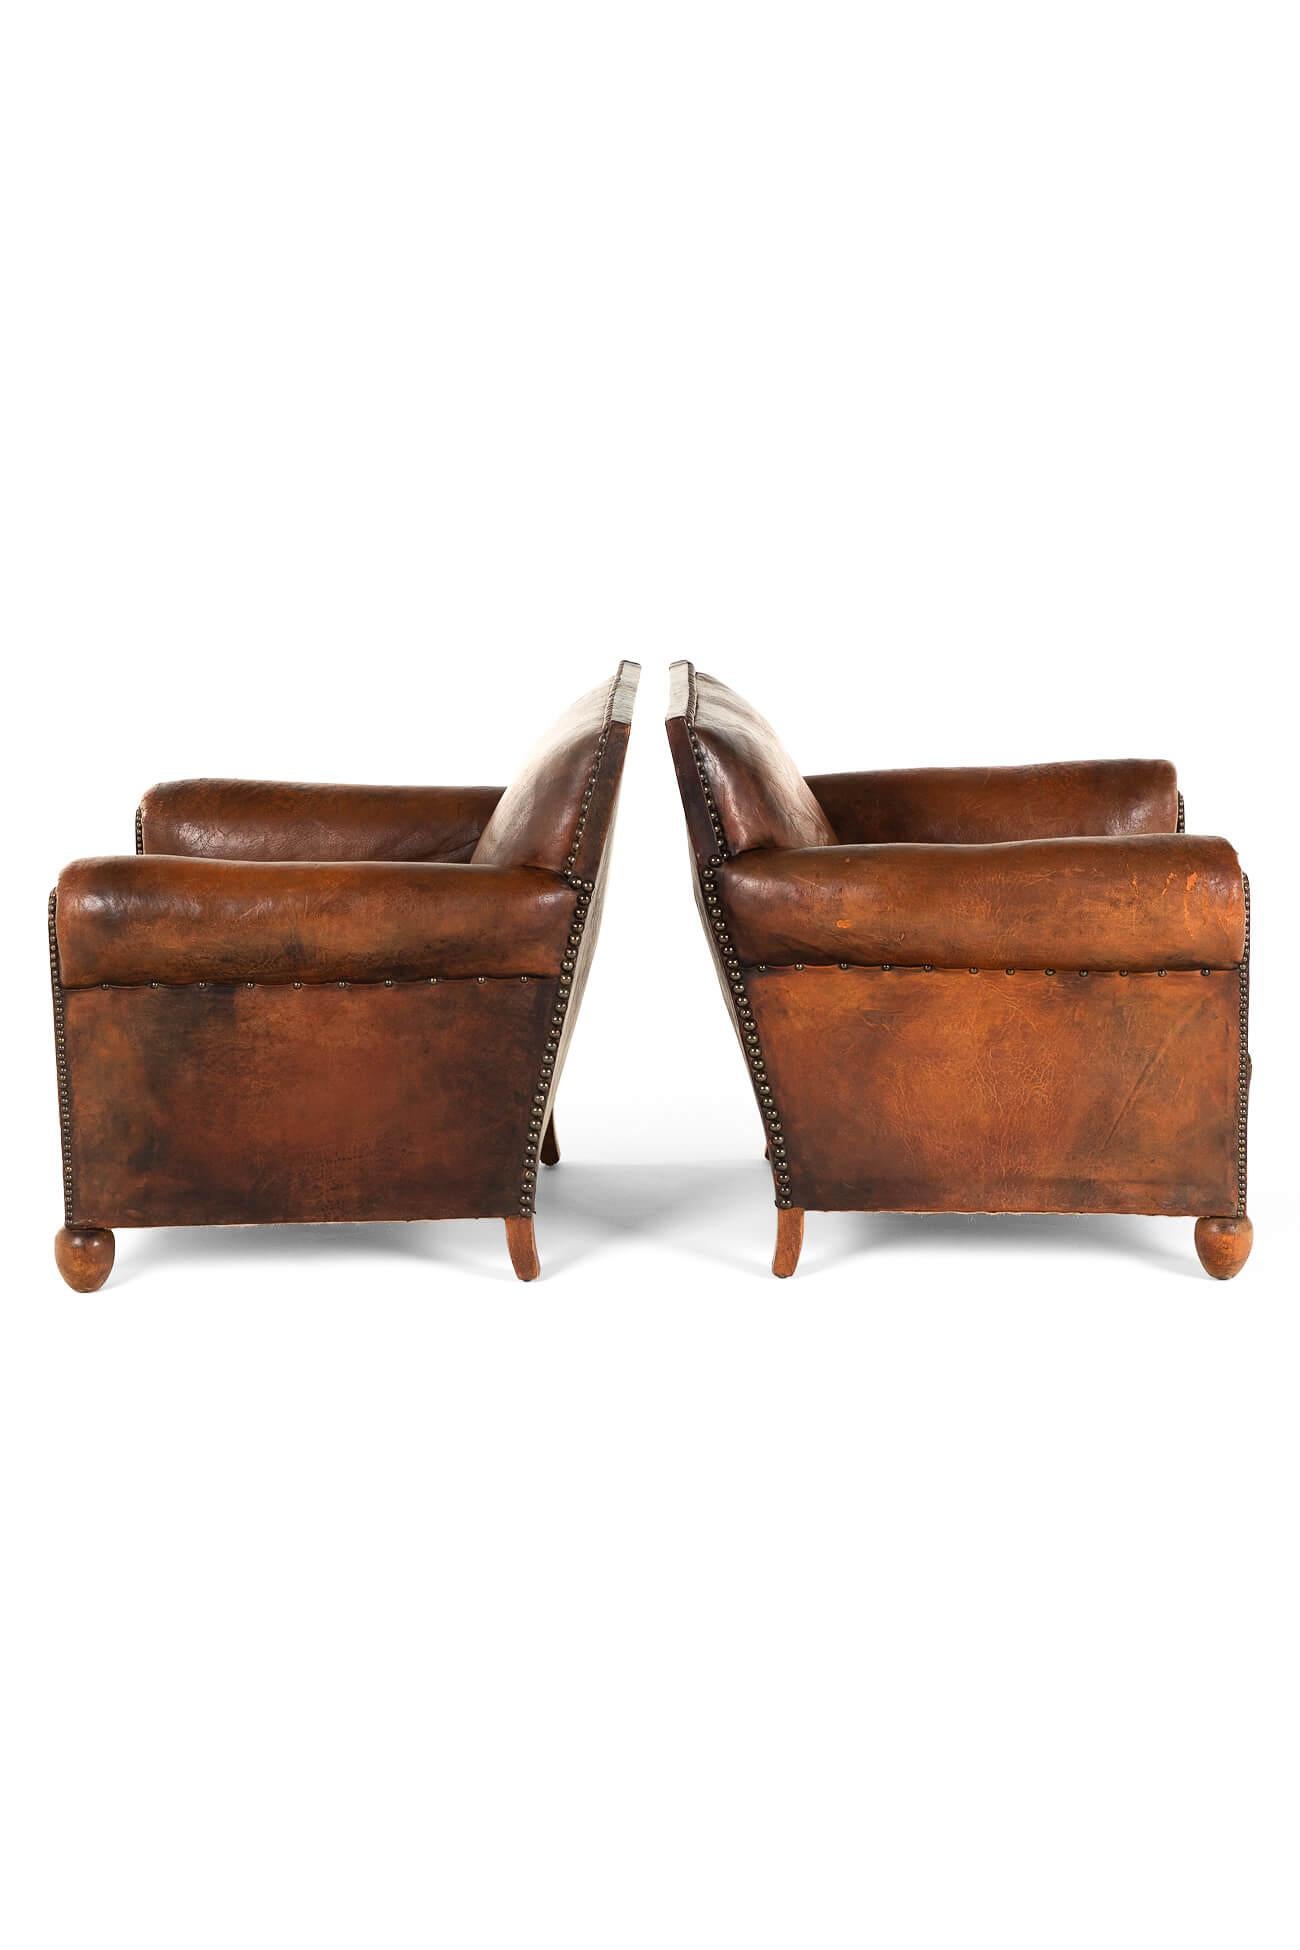 Art Deco Pair of French Leather Studded Club Chairs